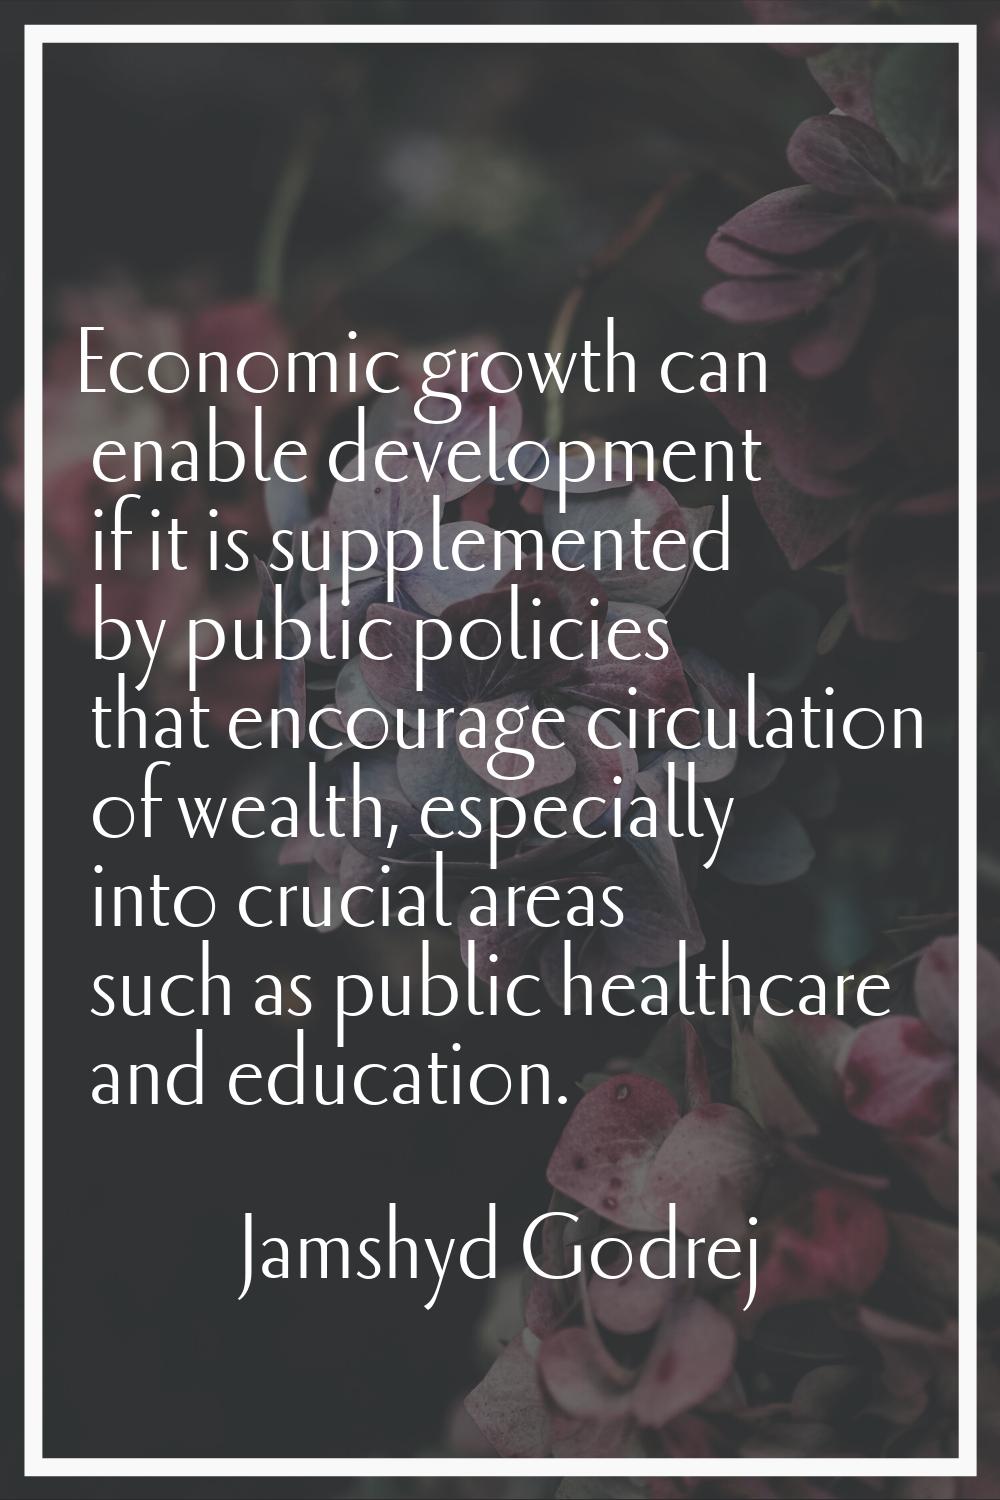 Economic growth can enable development if it is supplemented by public policies that encourage circ